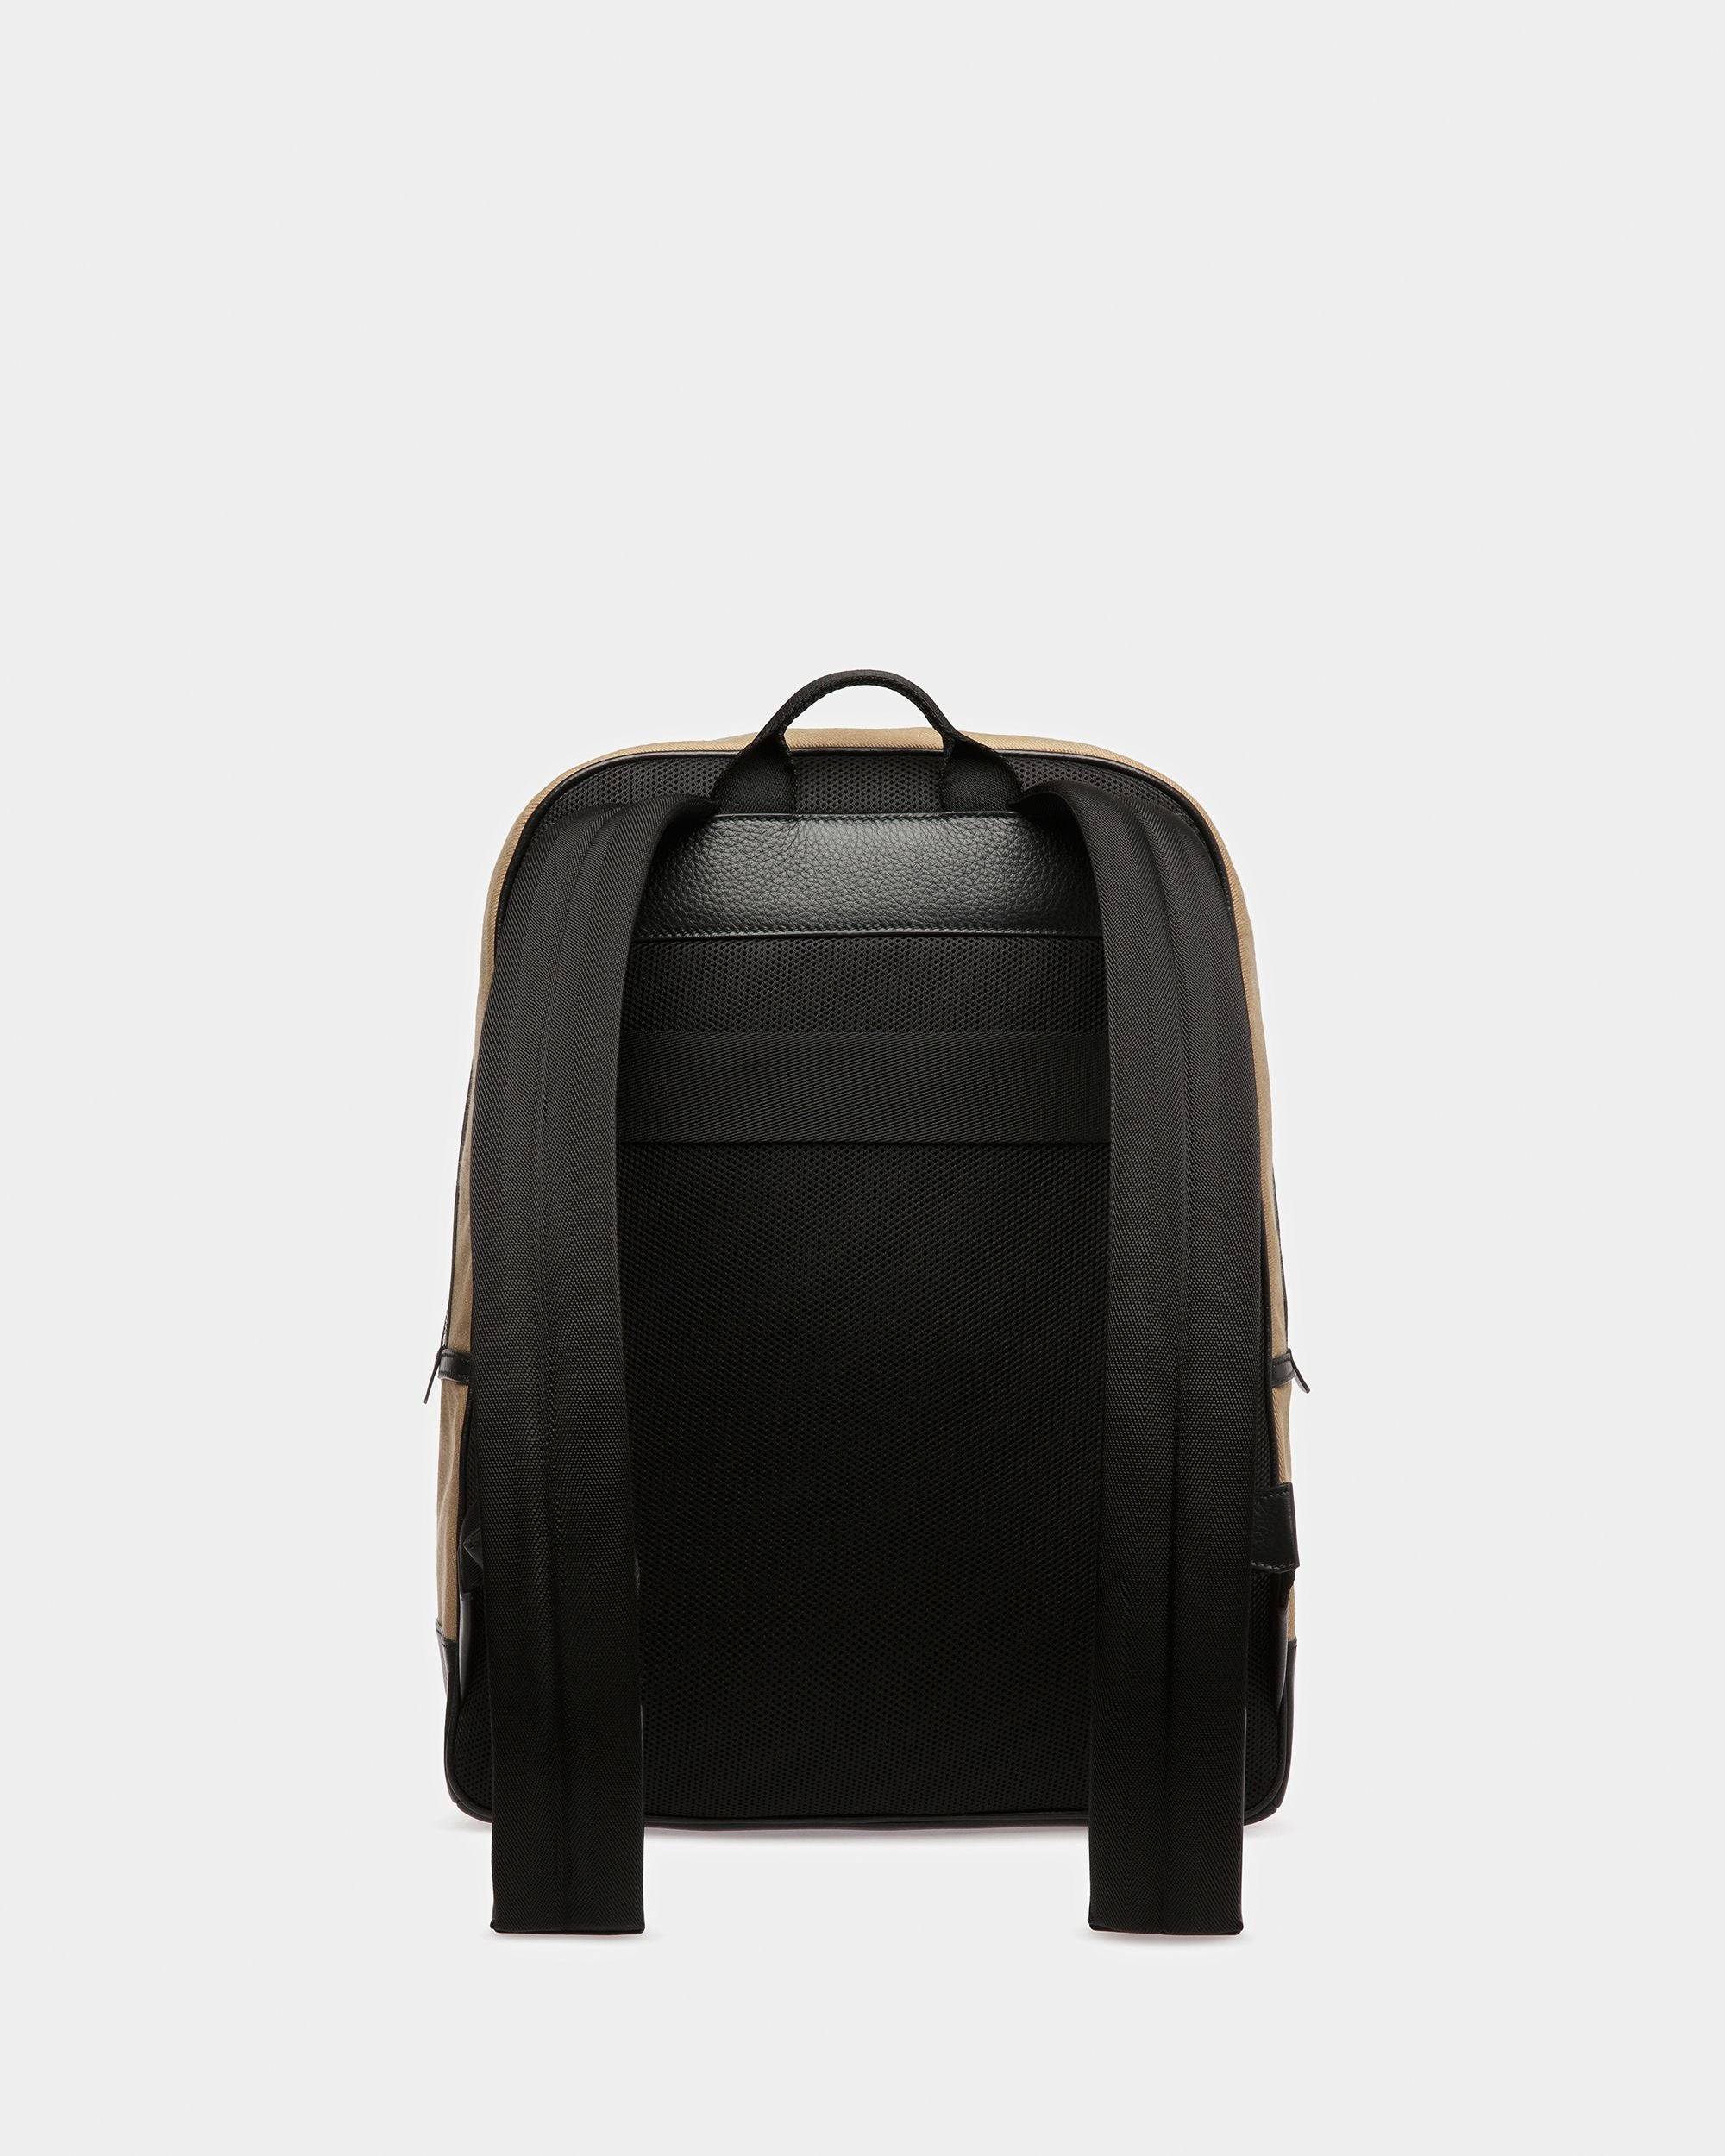 Treck | Men's Backpack | Sand And Black Fabric And Leather | Bally | Still Life Back